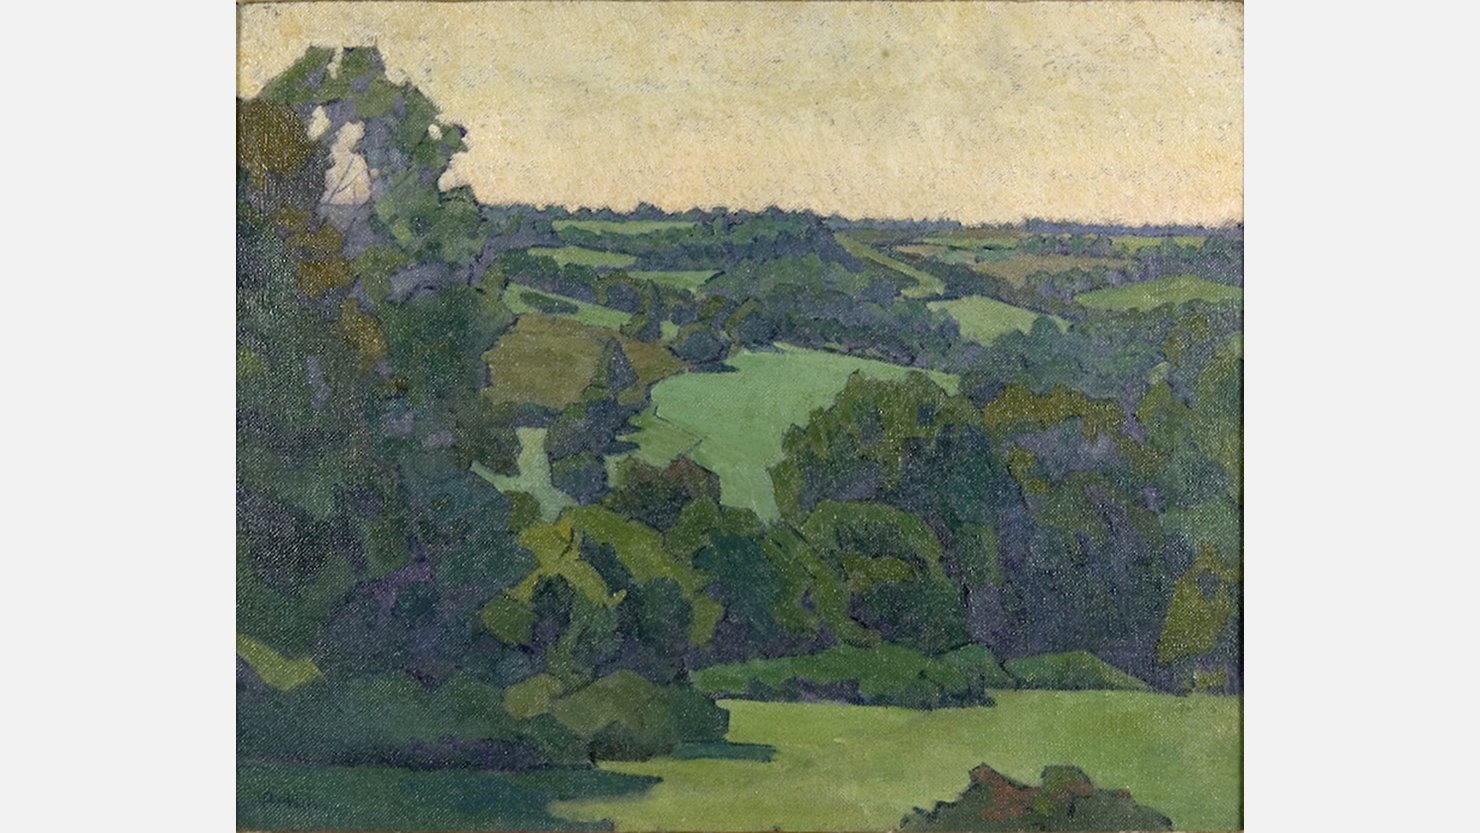 Green Devon by Robert Polhill Bevan, 1919. Courtesy of The Box, Plymouth